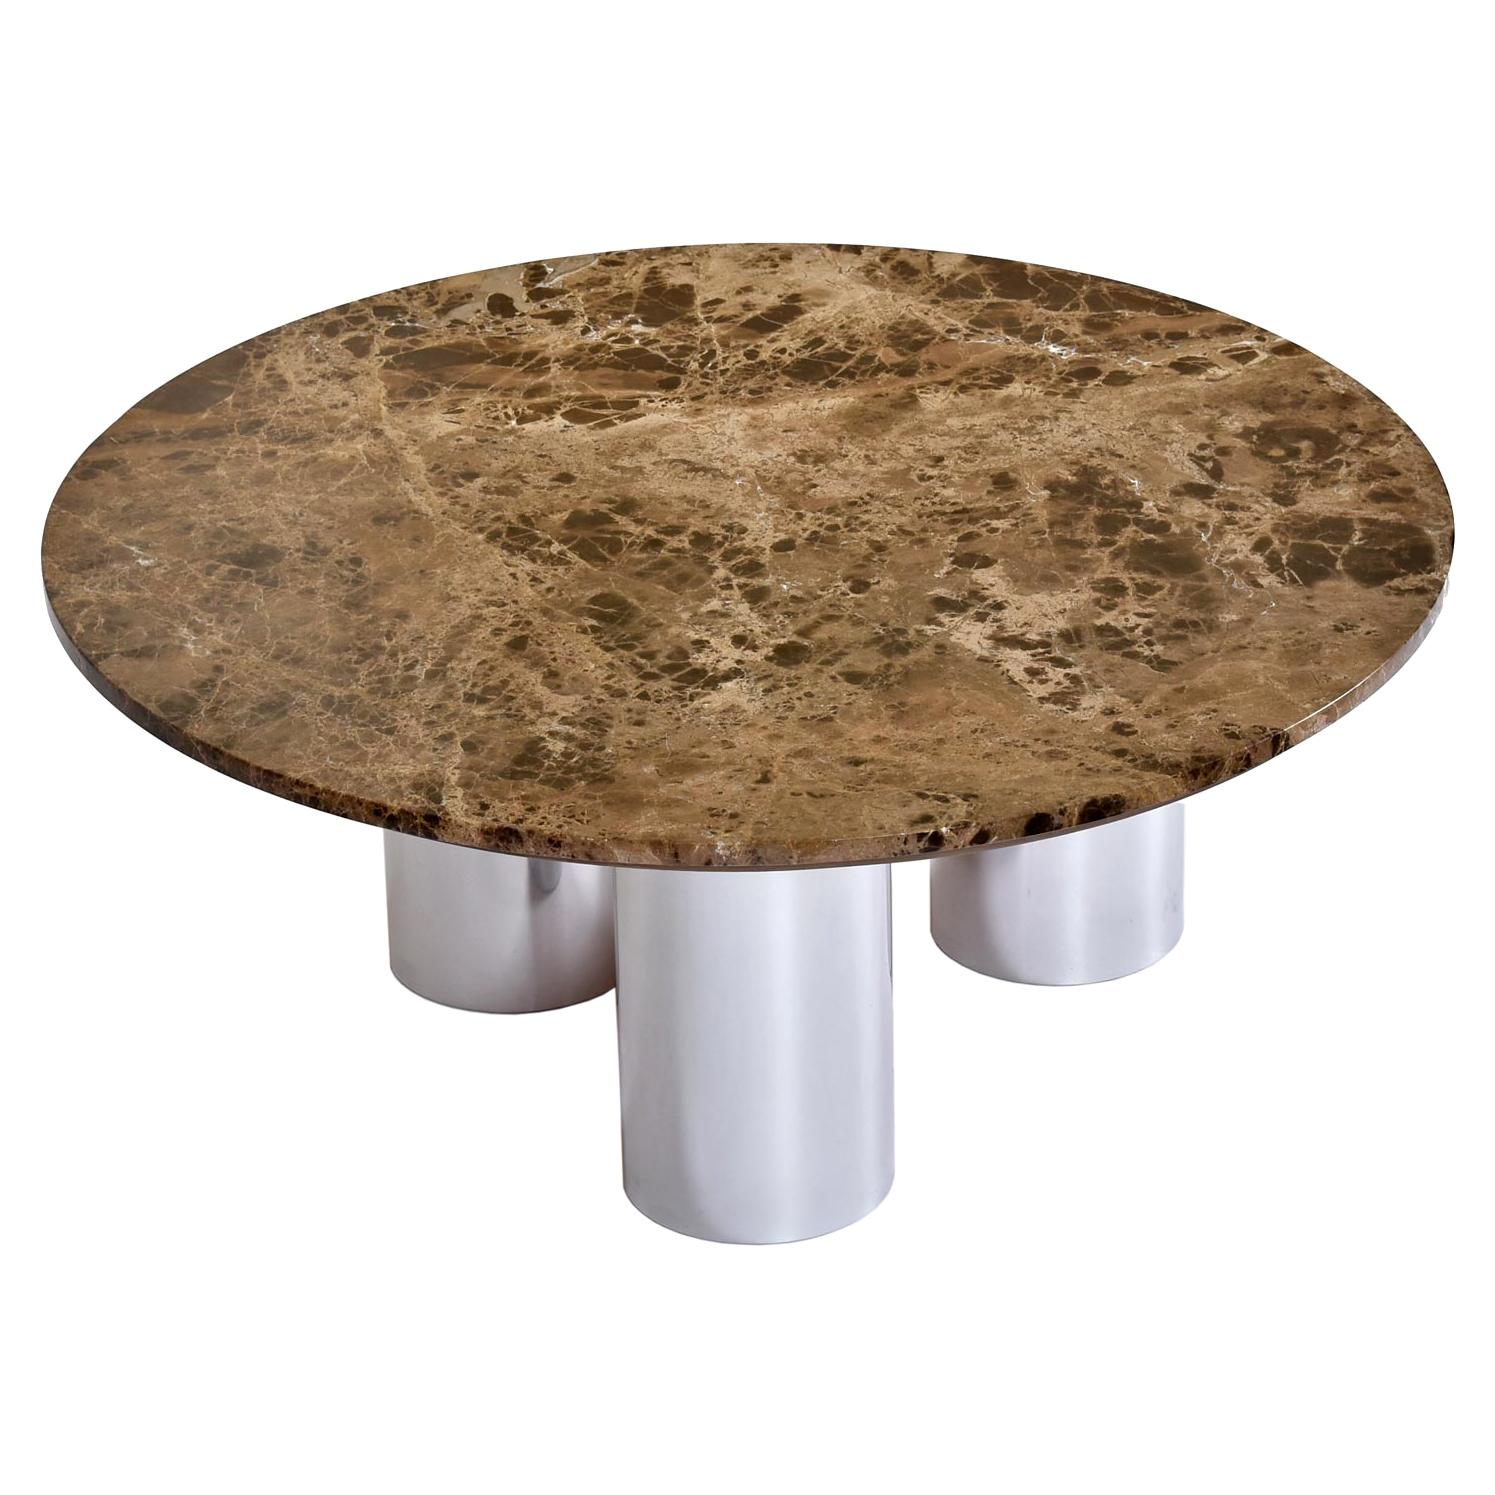 1970's Stainless Steel Tubular Pedestal Round Marble Coffee Table